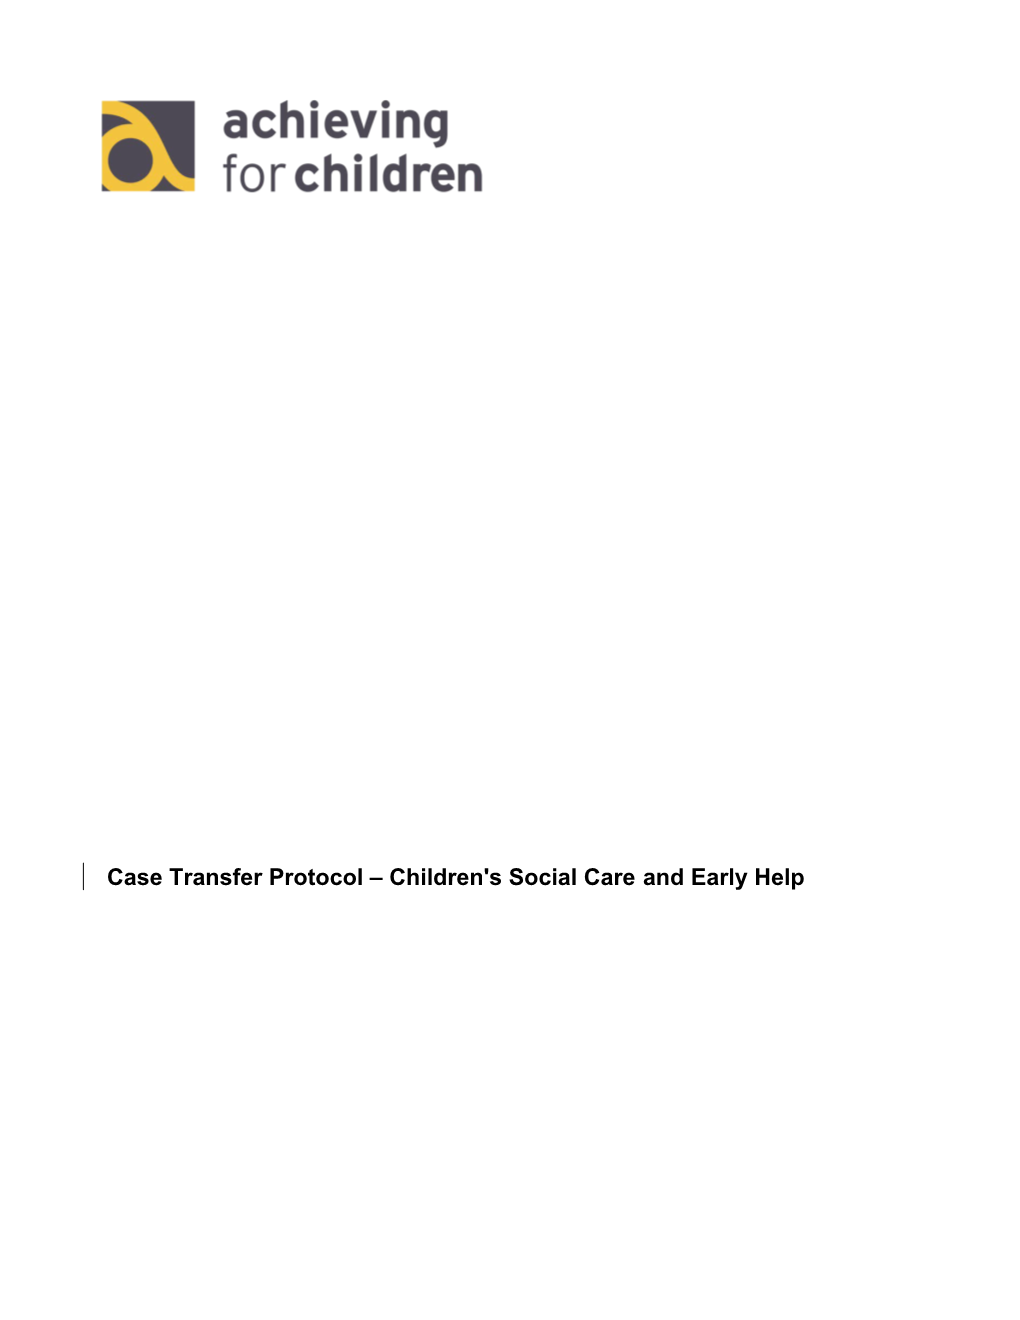 Case Transfer Protocol Children's Social Careand Early Help